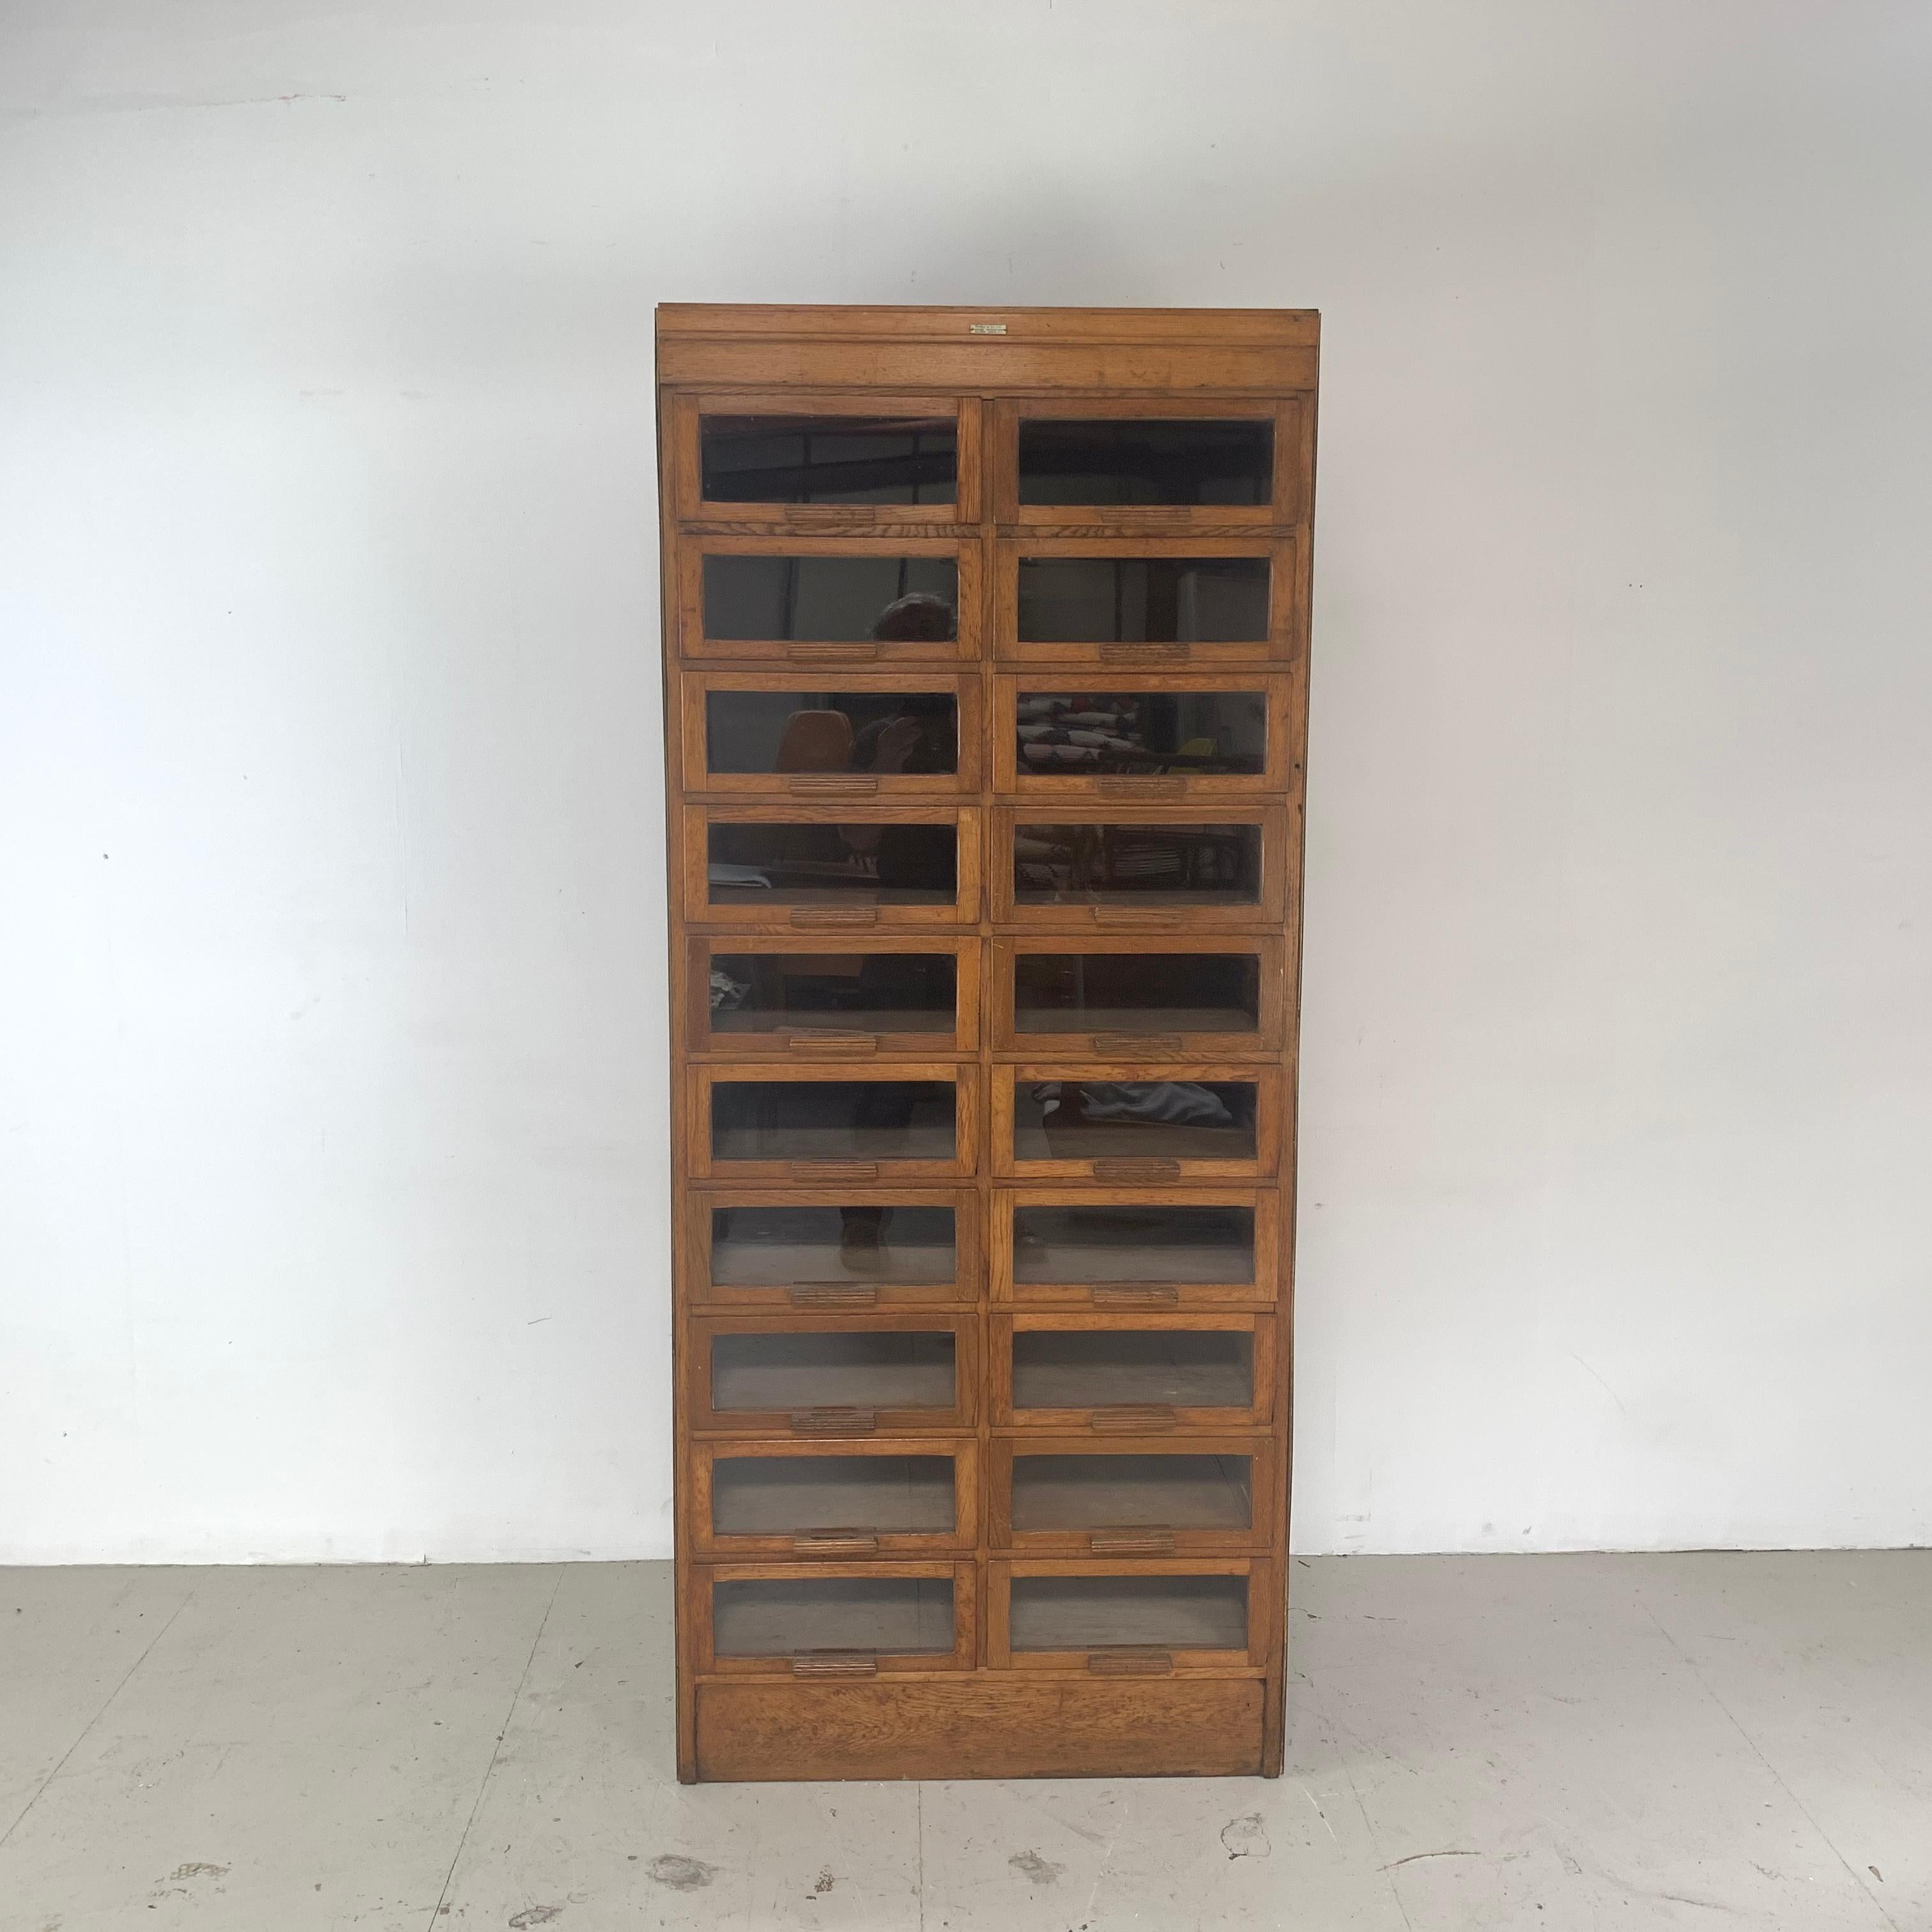 English Vintage 20-Drawer Haberdashery Cabinet Shop Display Made by Dudley & Co.